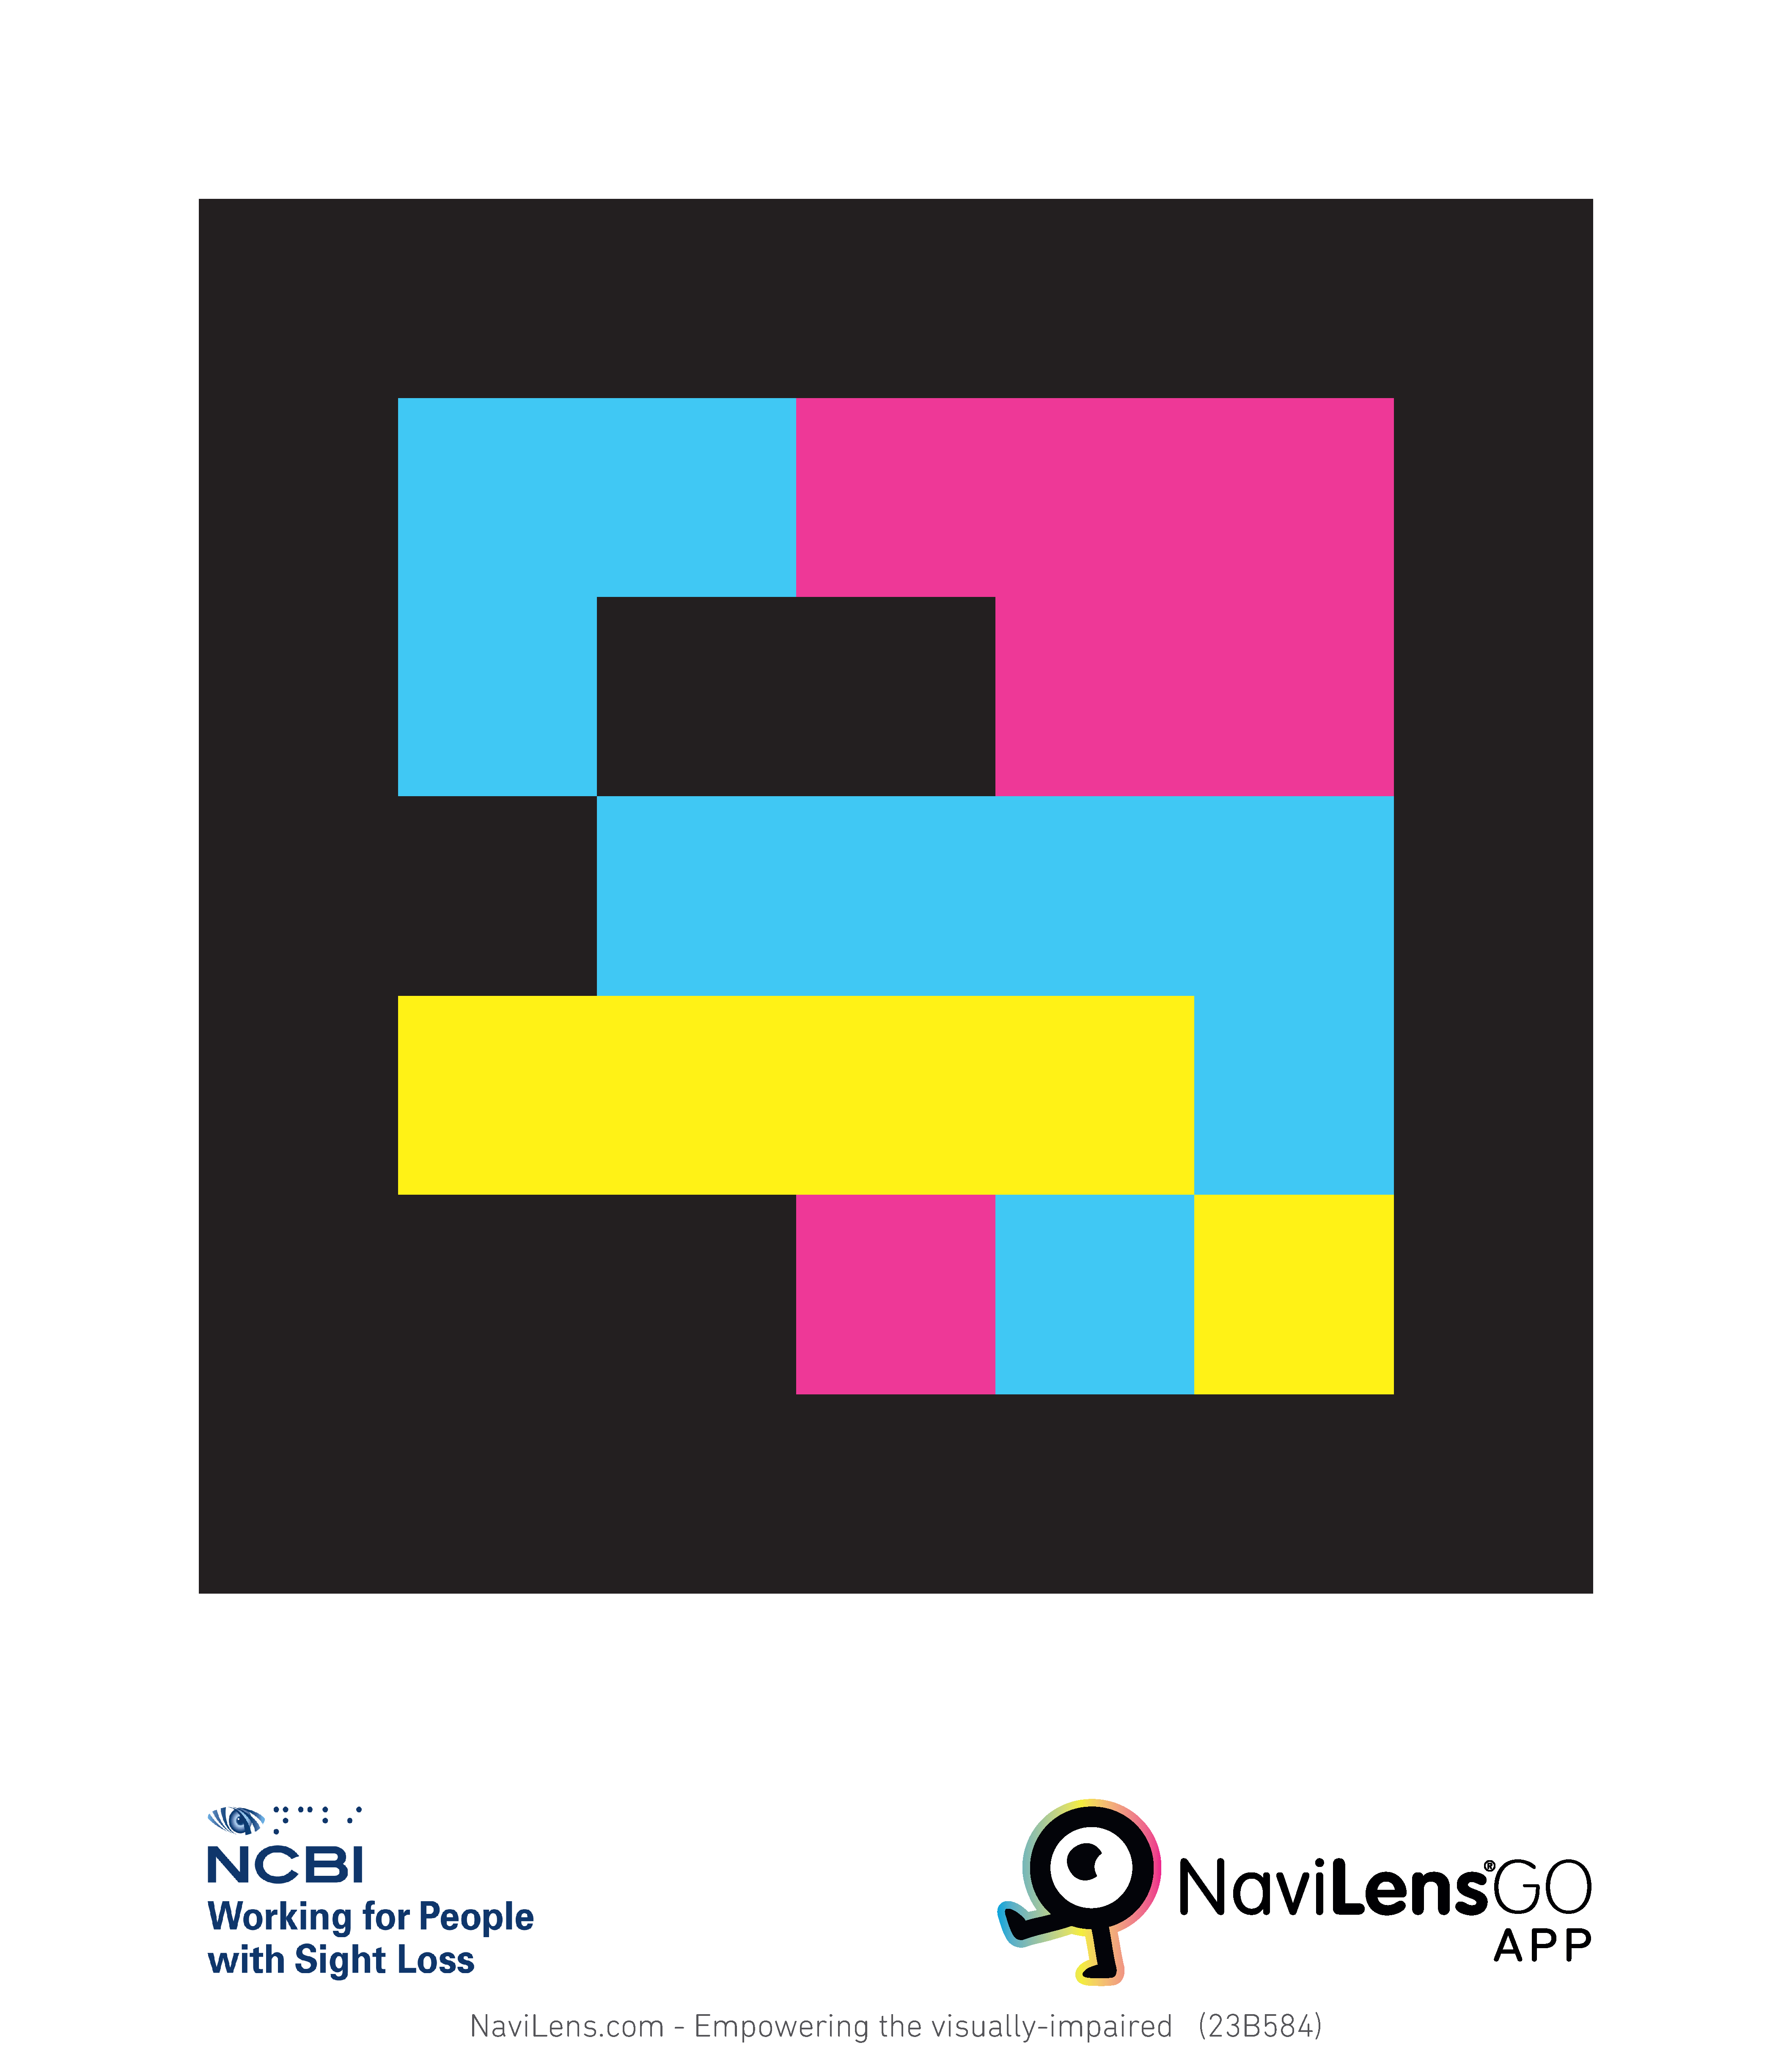 This is an example of a NaviLens barcode for the NCBI Camden Street store event which can be scanned using the app. The barcode is made of a blue, yellow and pink abstract shape on a black background.